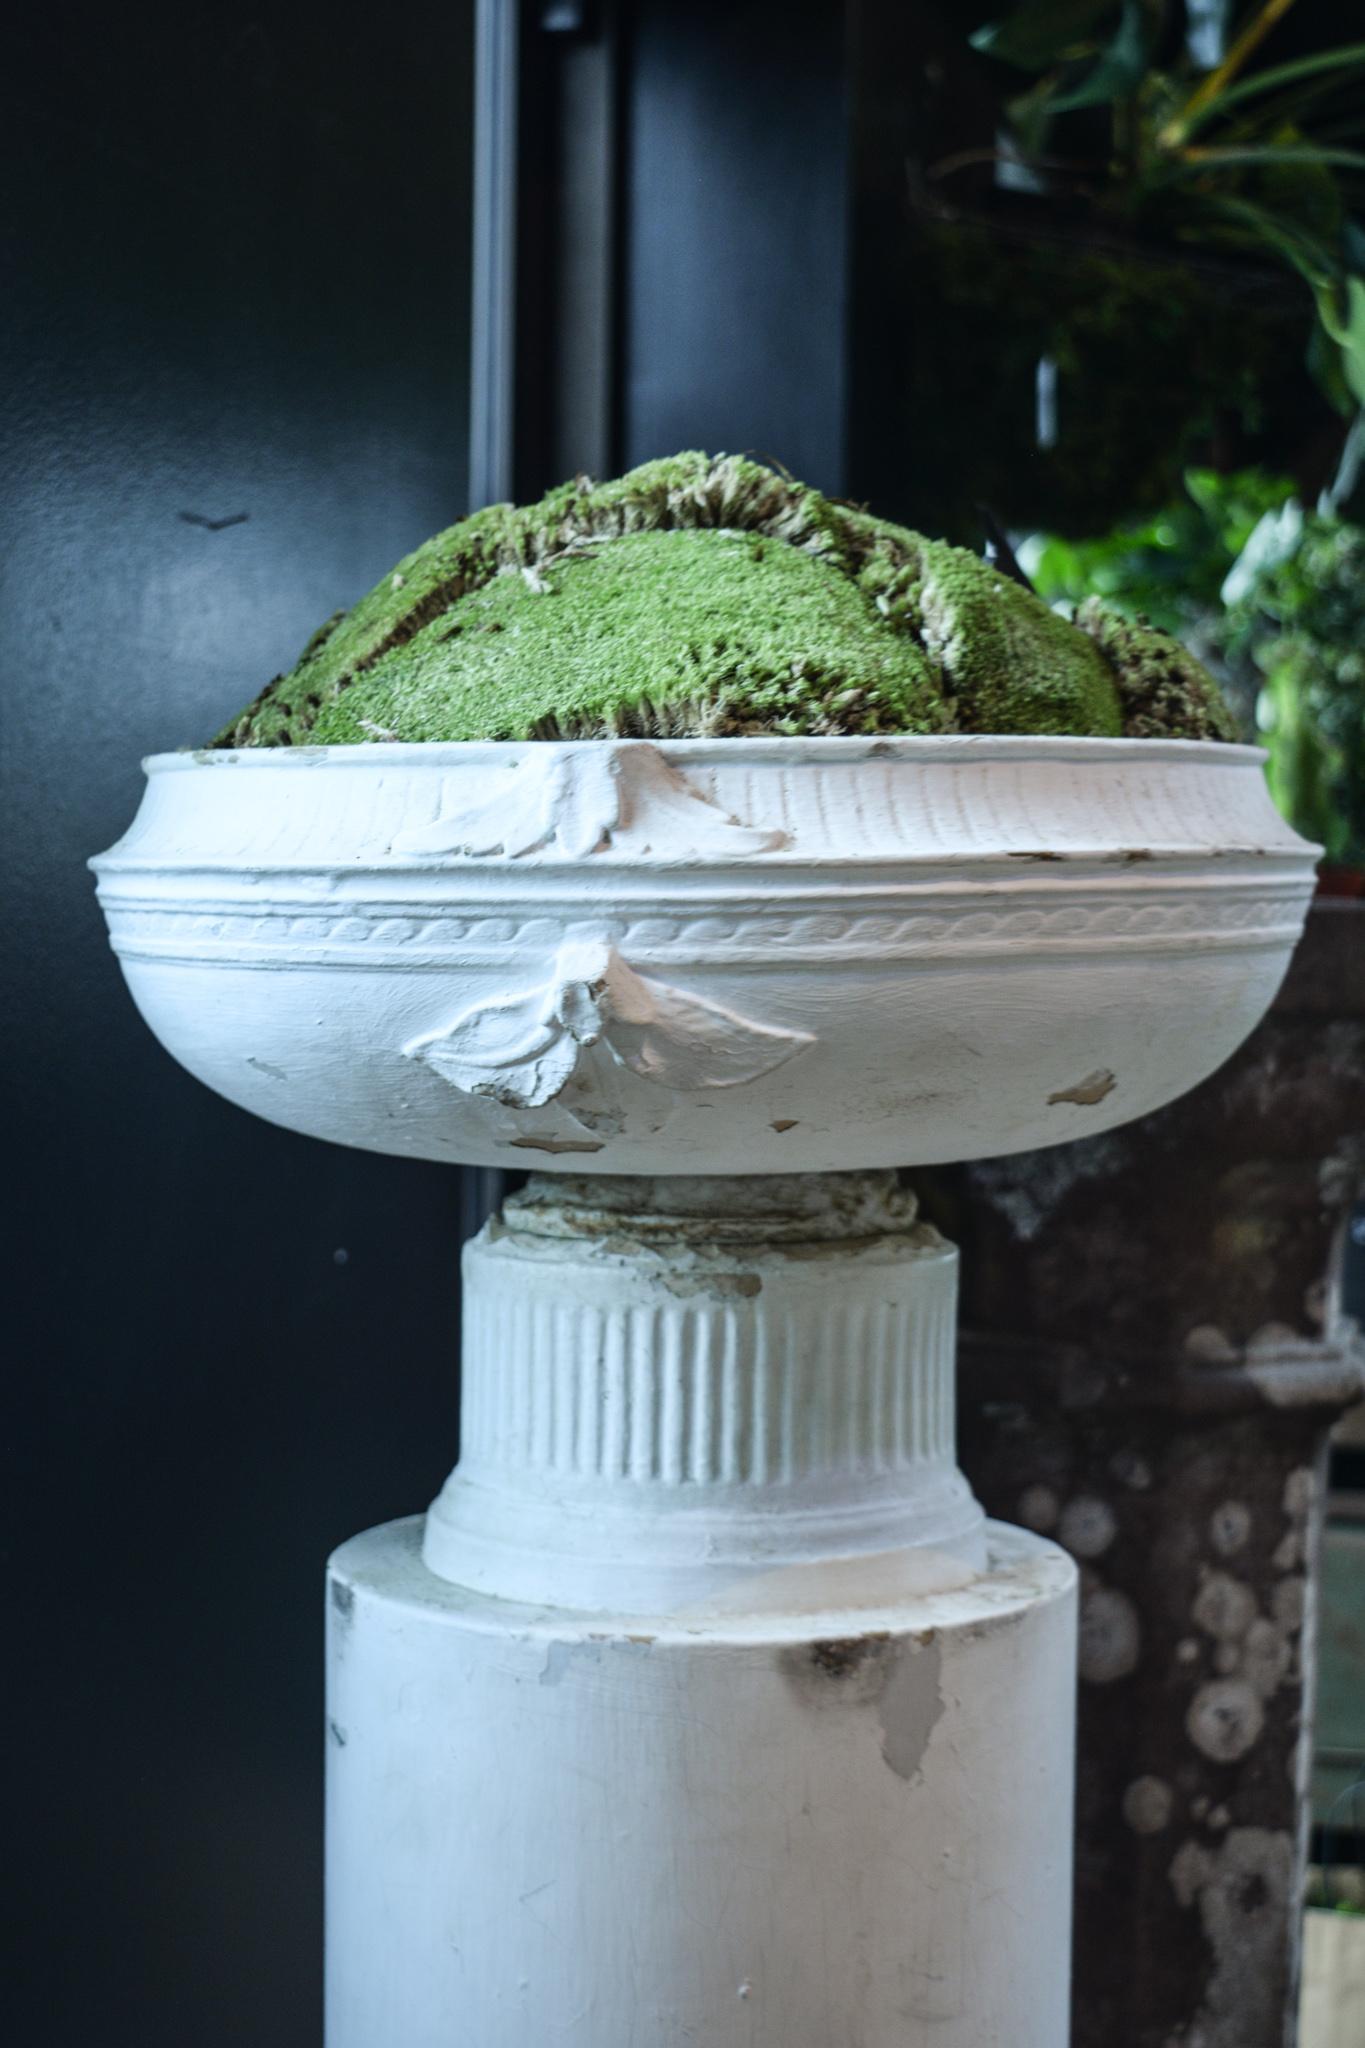 When we happened upon the inscription of J M Blashfield on this pair of classic white urns, we felt truly close to history. J M Blashfield was a terracotta manufacturer and property developer in England in the 19th century. His extensive interest in